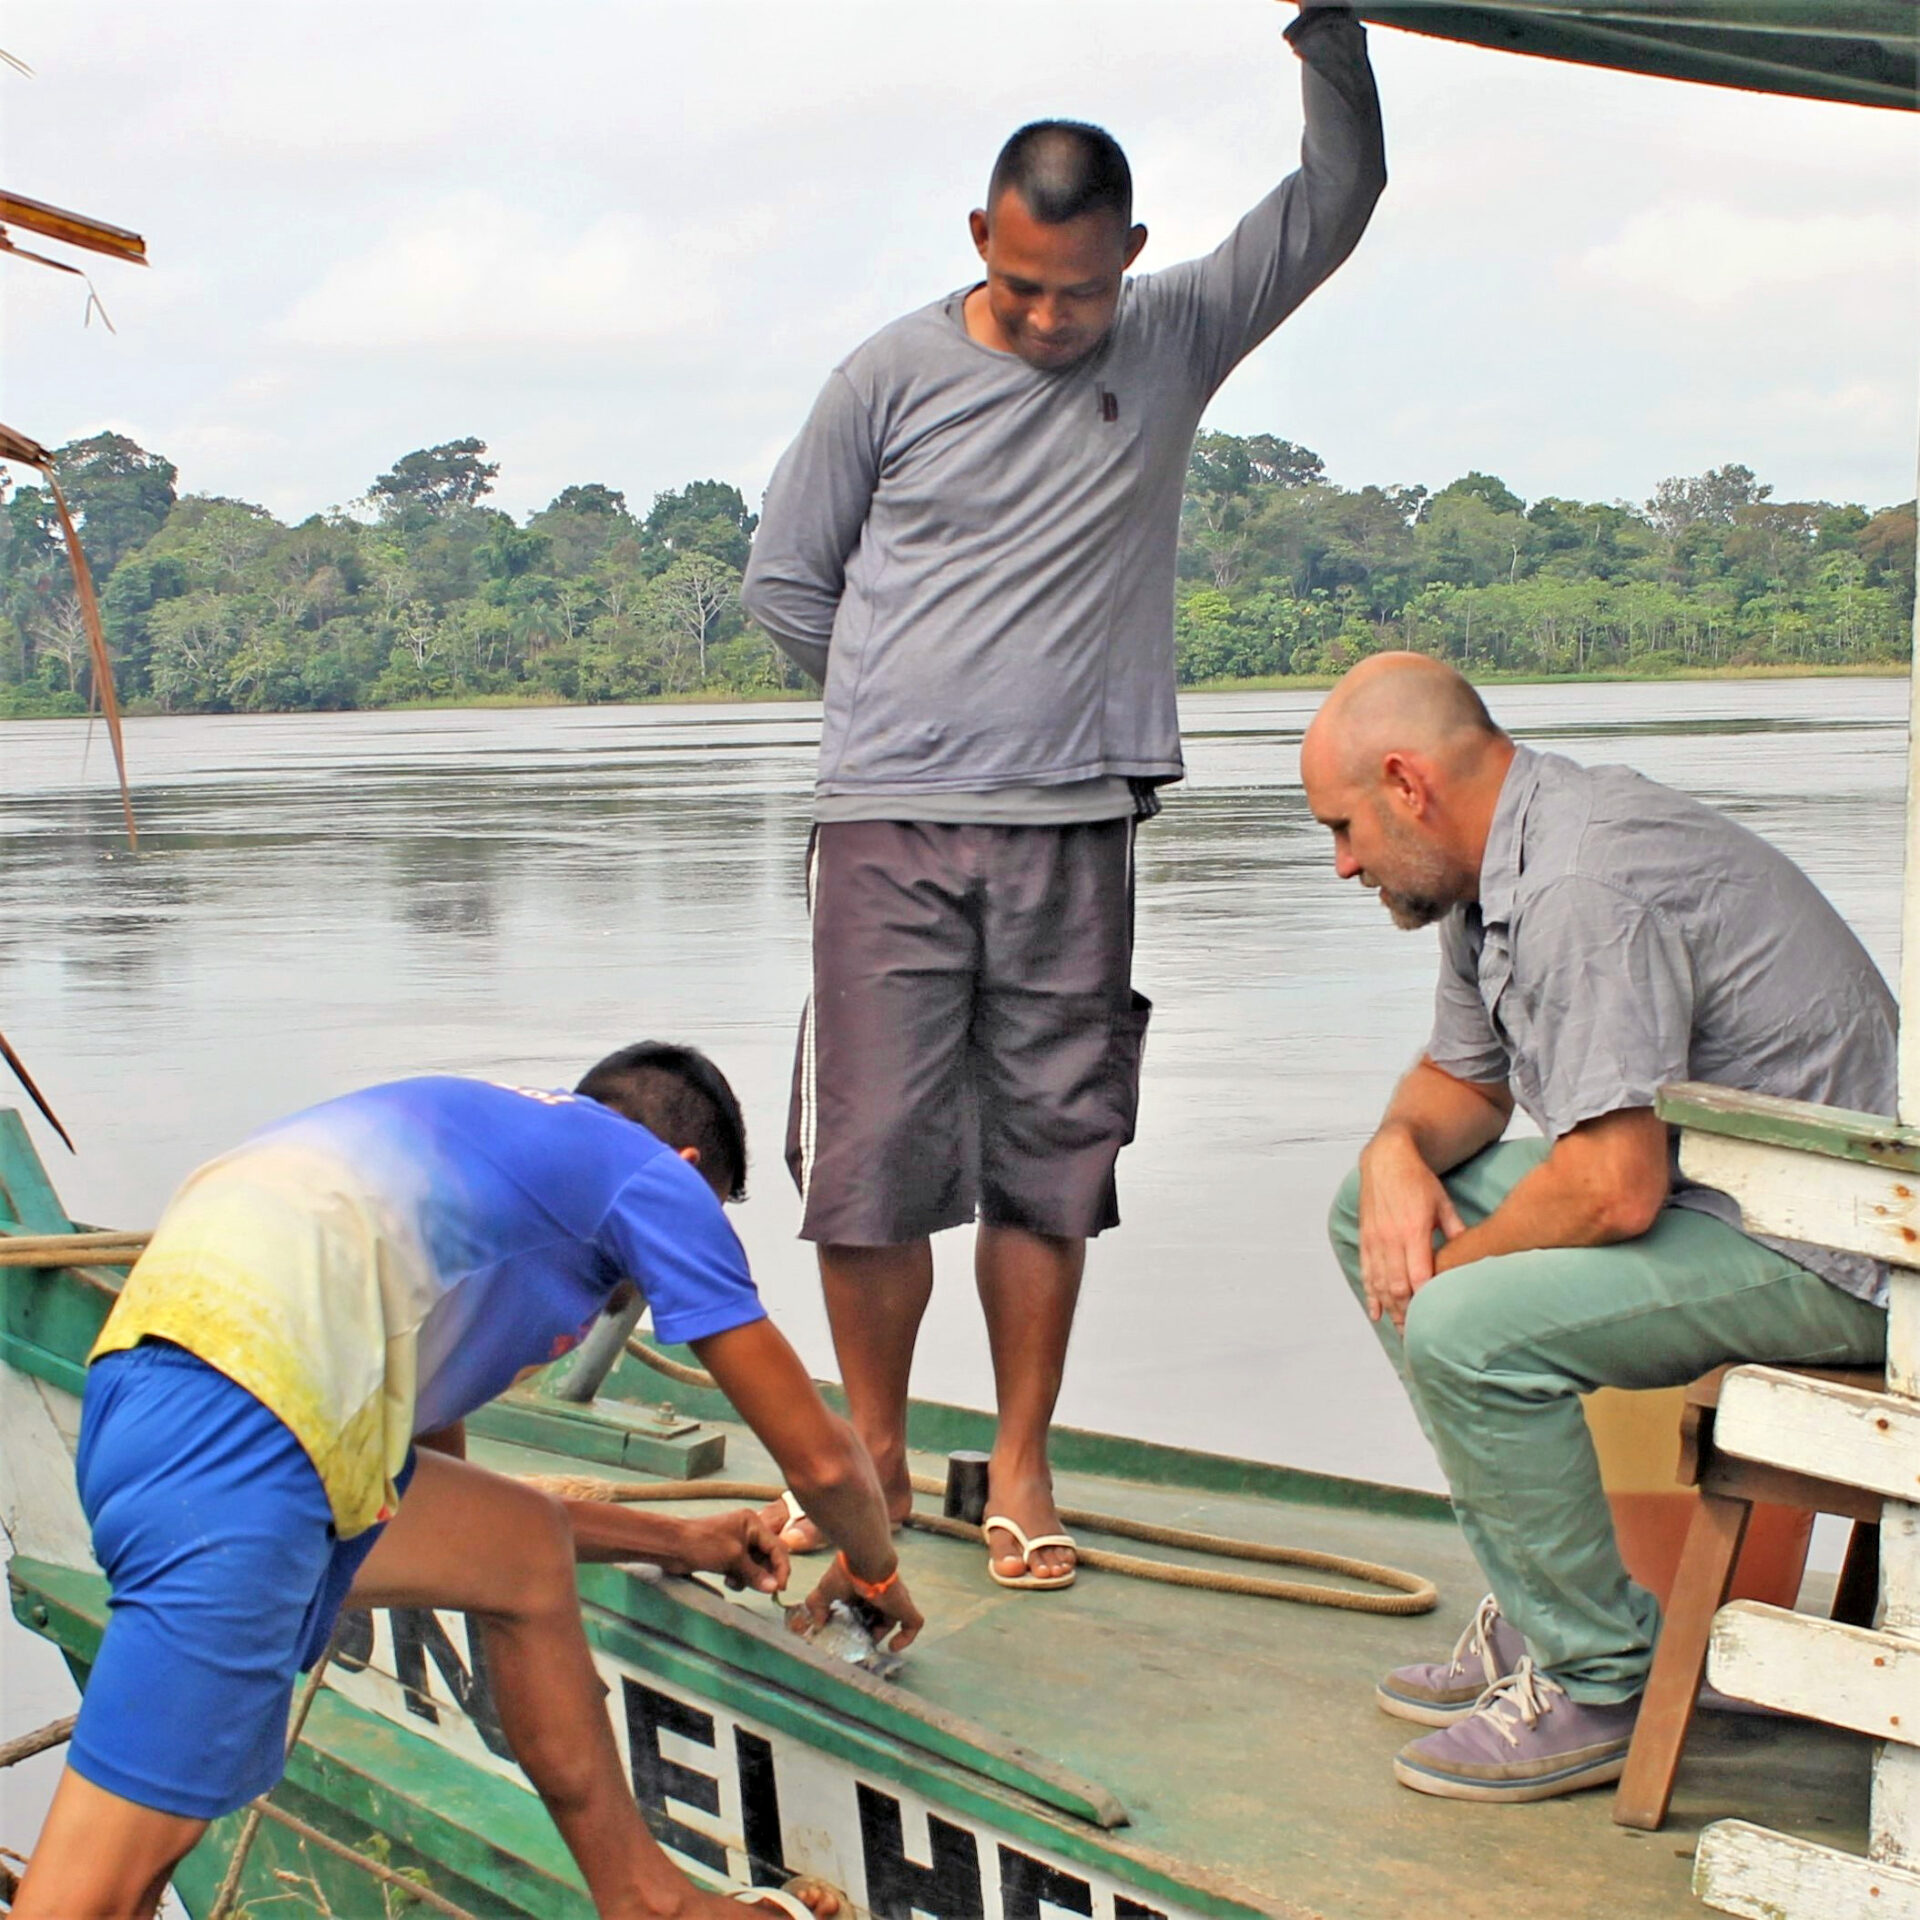 Fulbright Amazonia Creates an International Network to Support Conservation and Bioeconomies